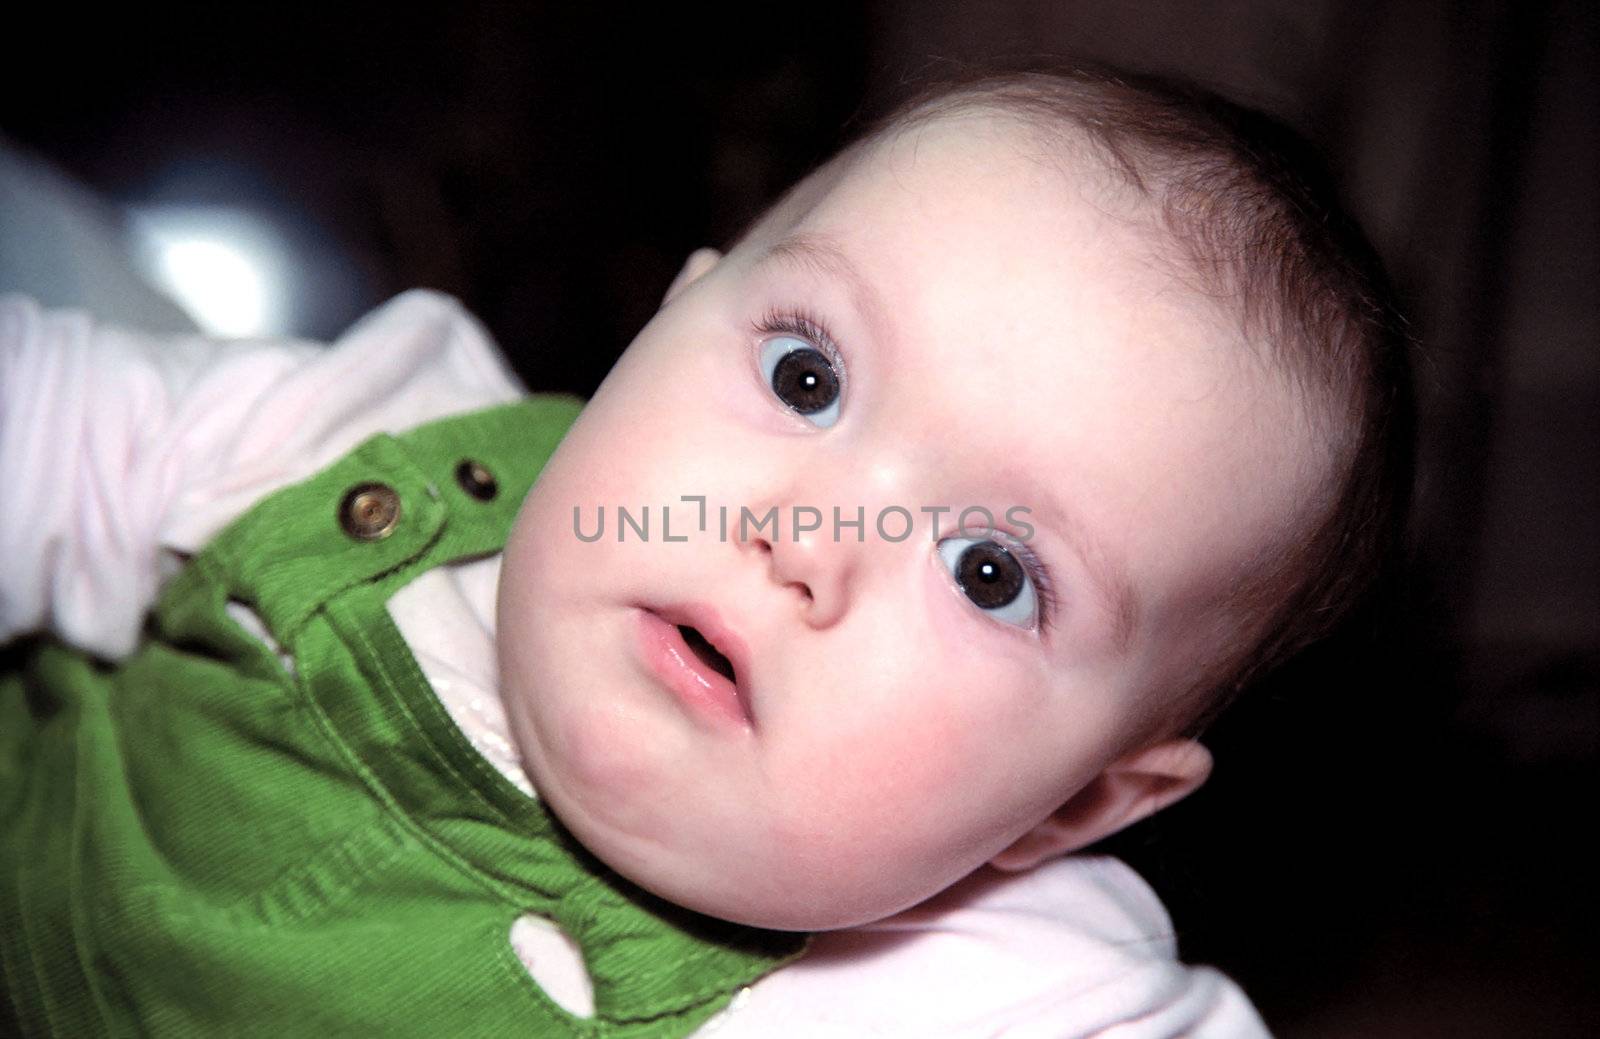 Portrait of infant looking at something with astonishment and circumspection